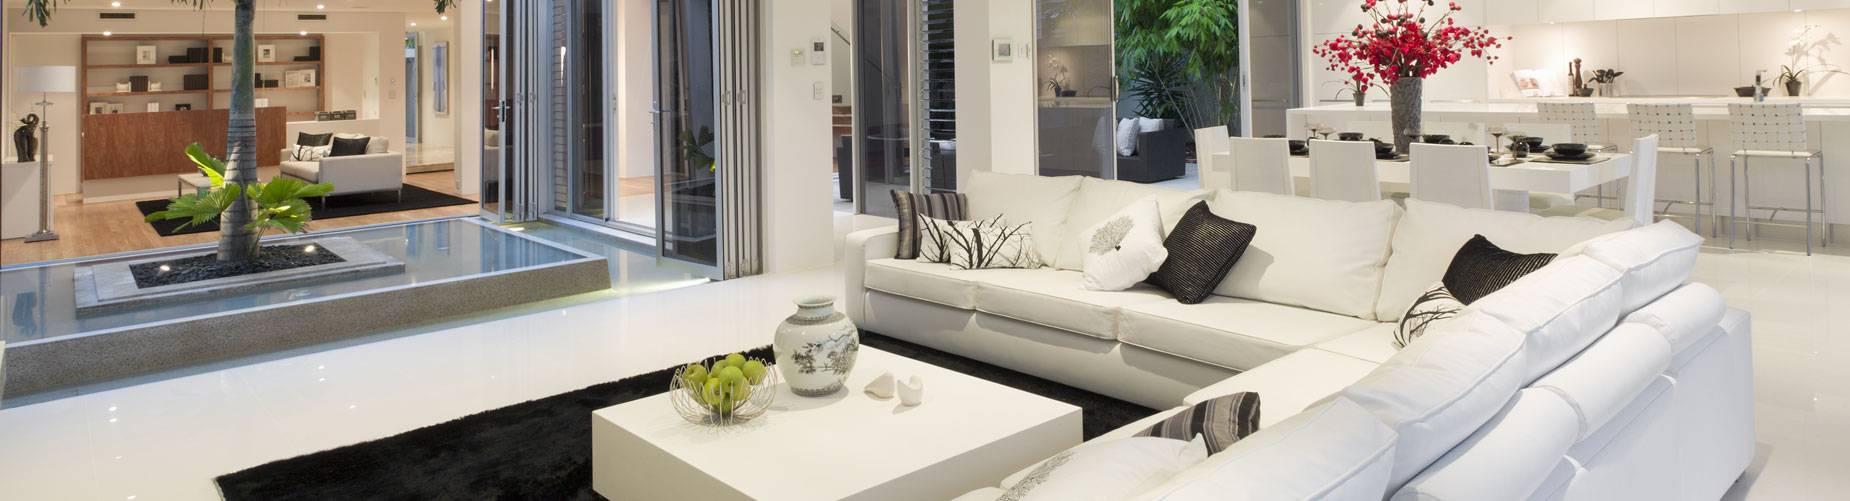 Living room at night with white colour scheme